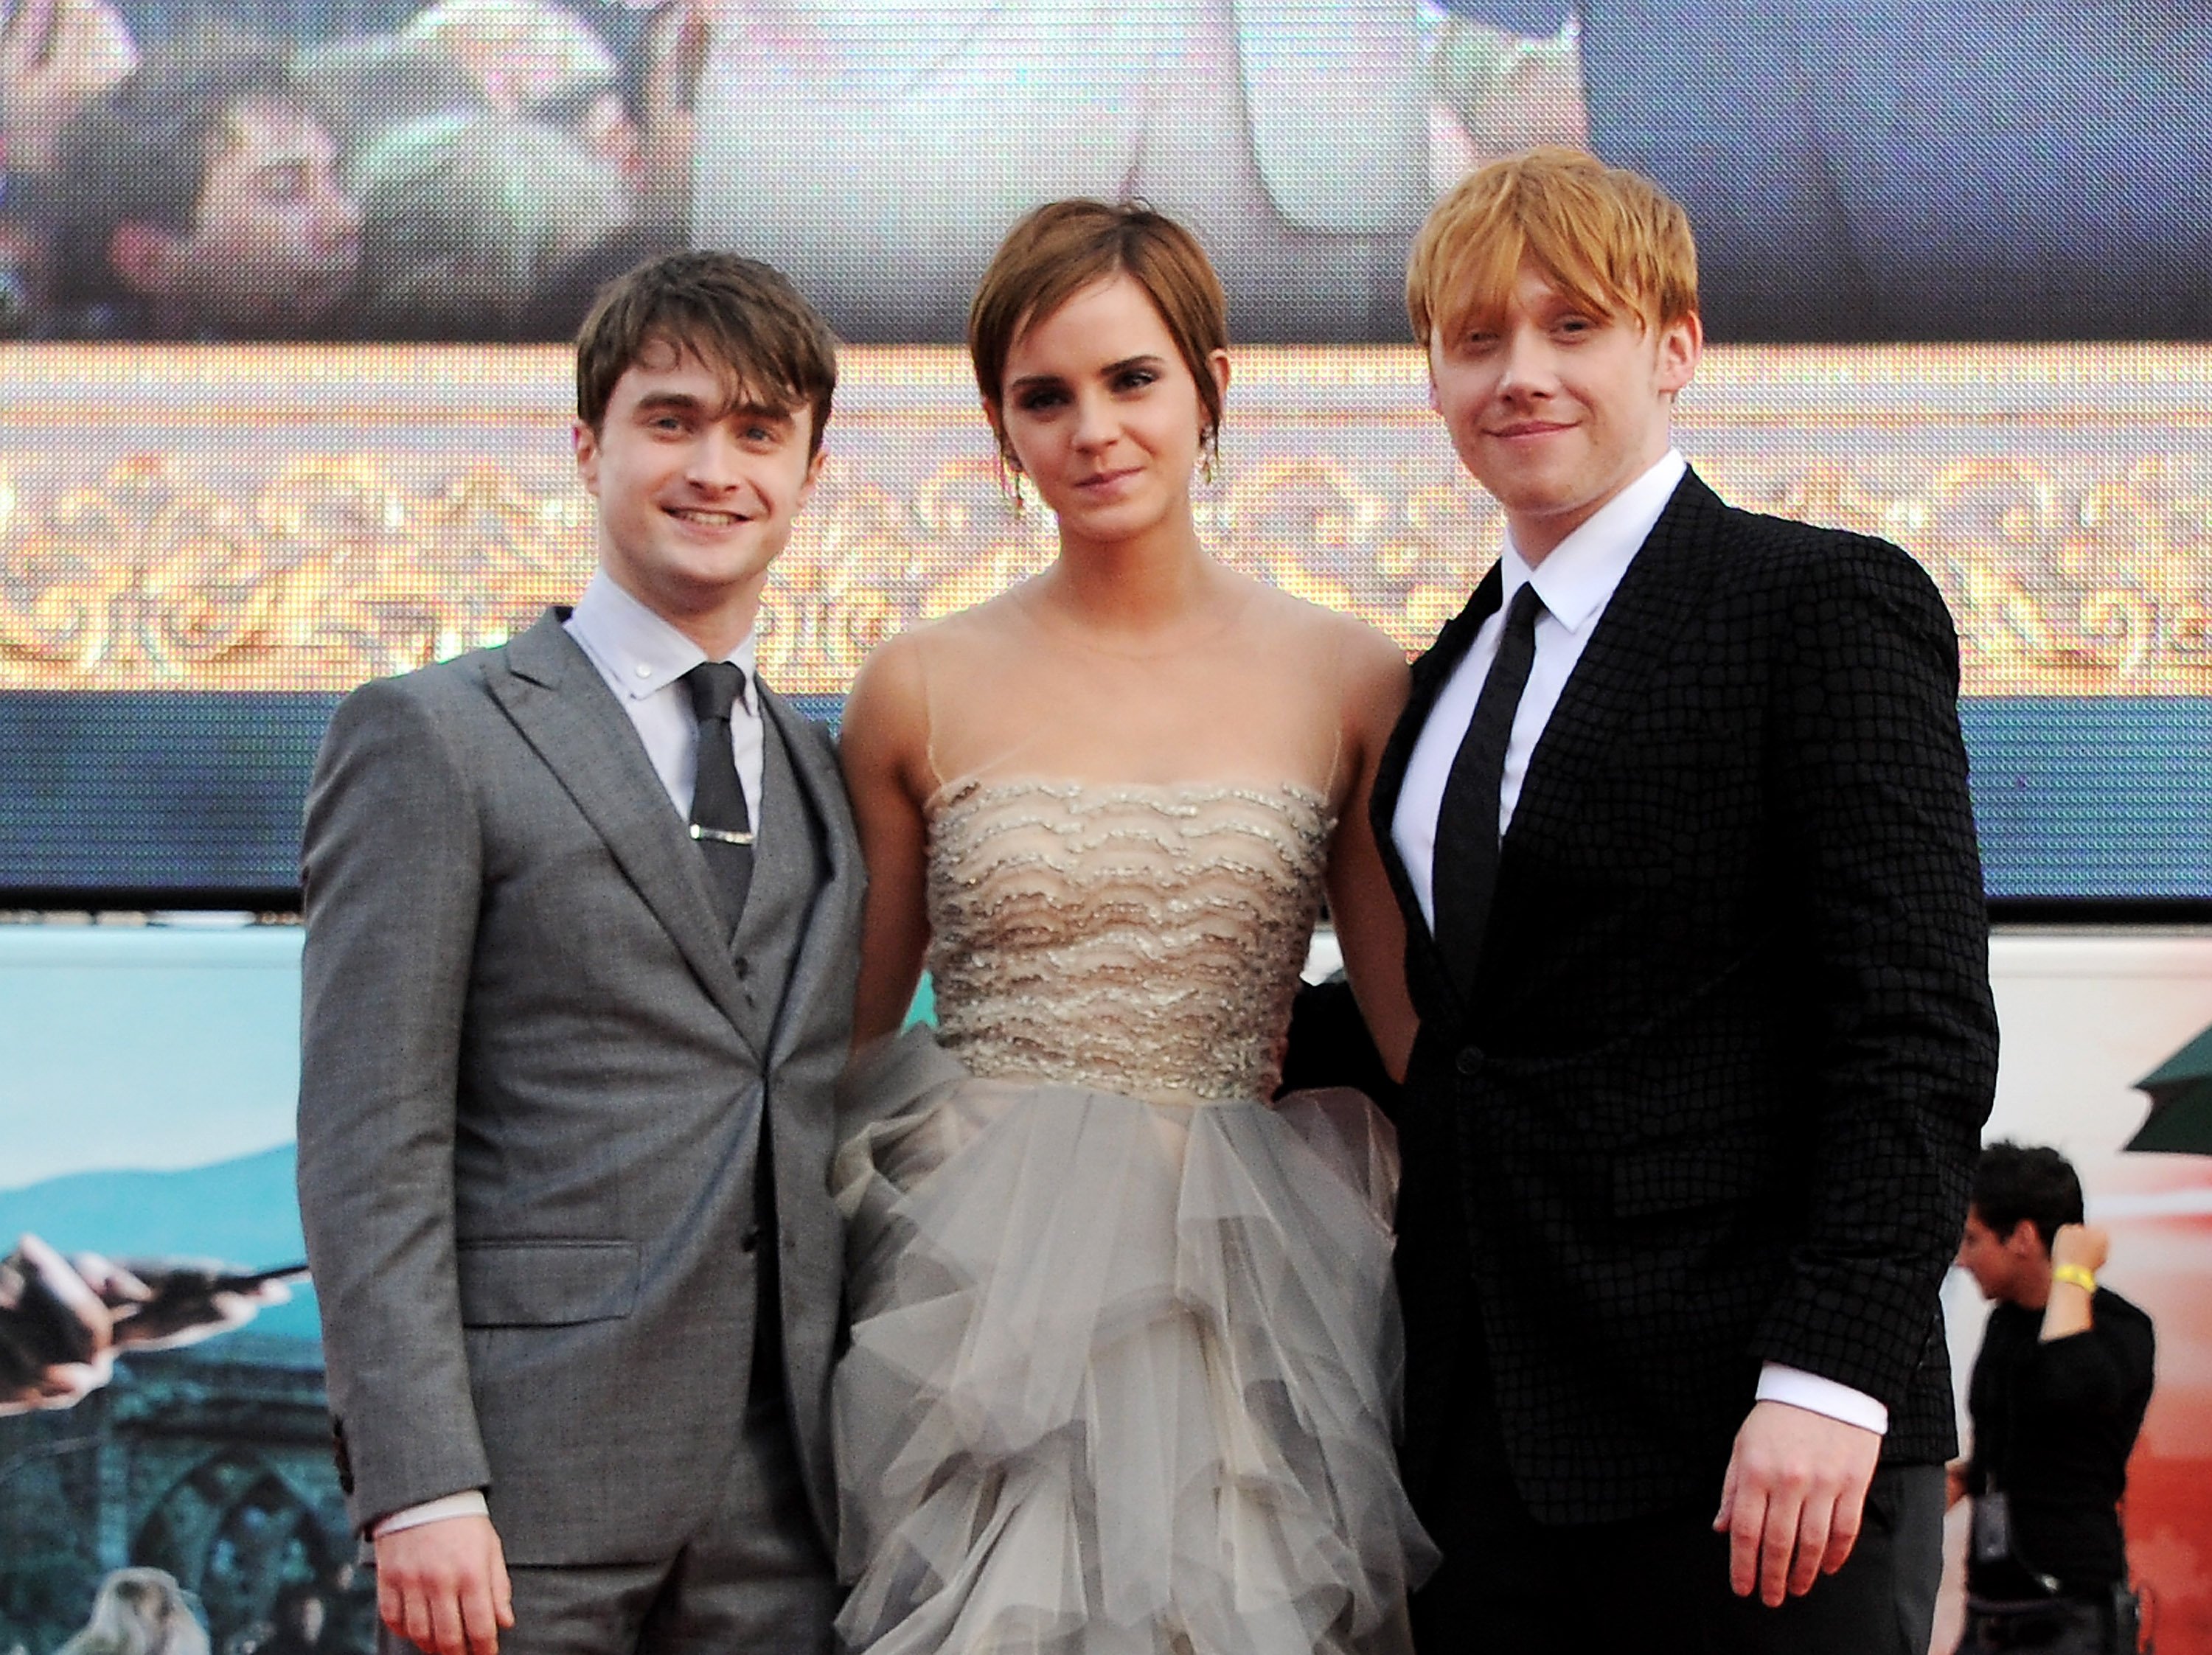 Stars of the Harry Potter movies Daniel Radcliffe, Emma Watson, and Rupert Grint